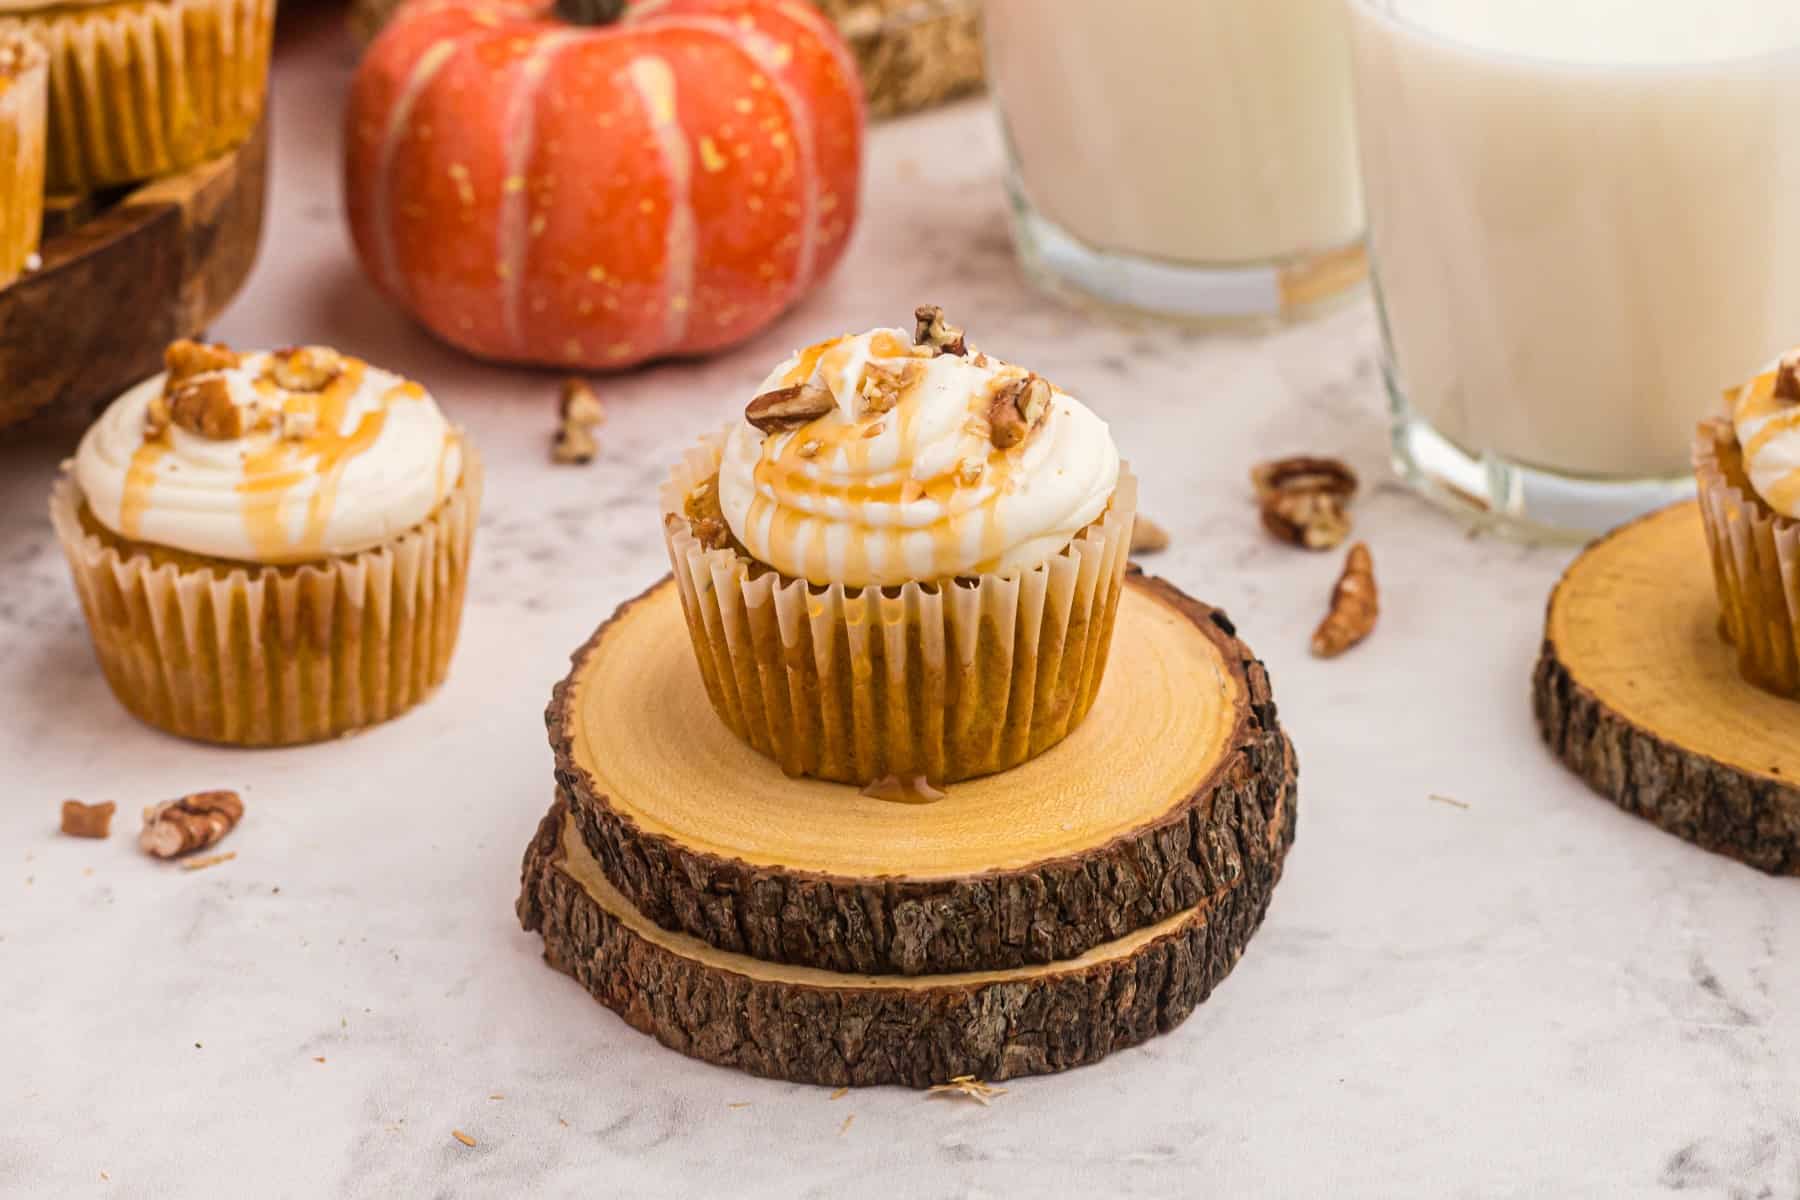 Horizontal shot of pumpkin cupcakes on stacked wooden boards with glasses of milk and a small ornamental pumpkin